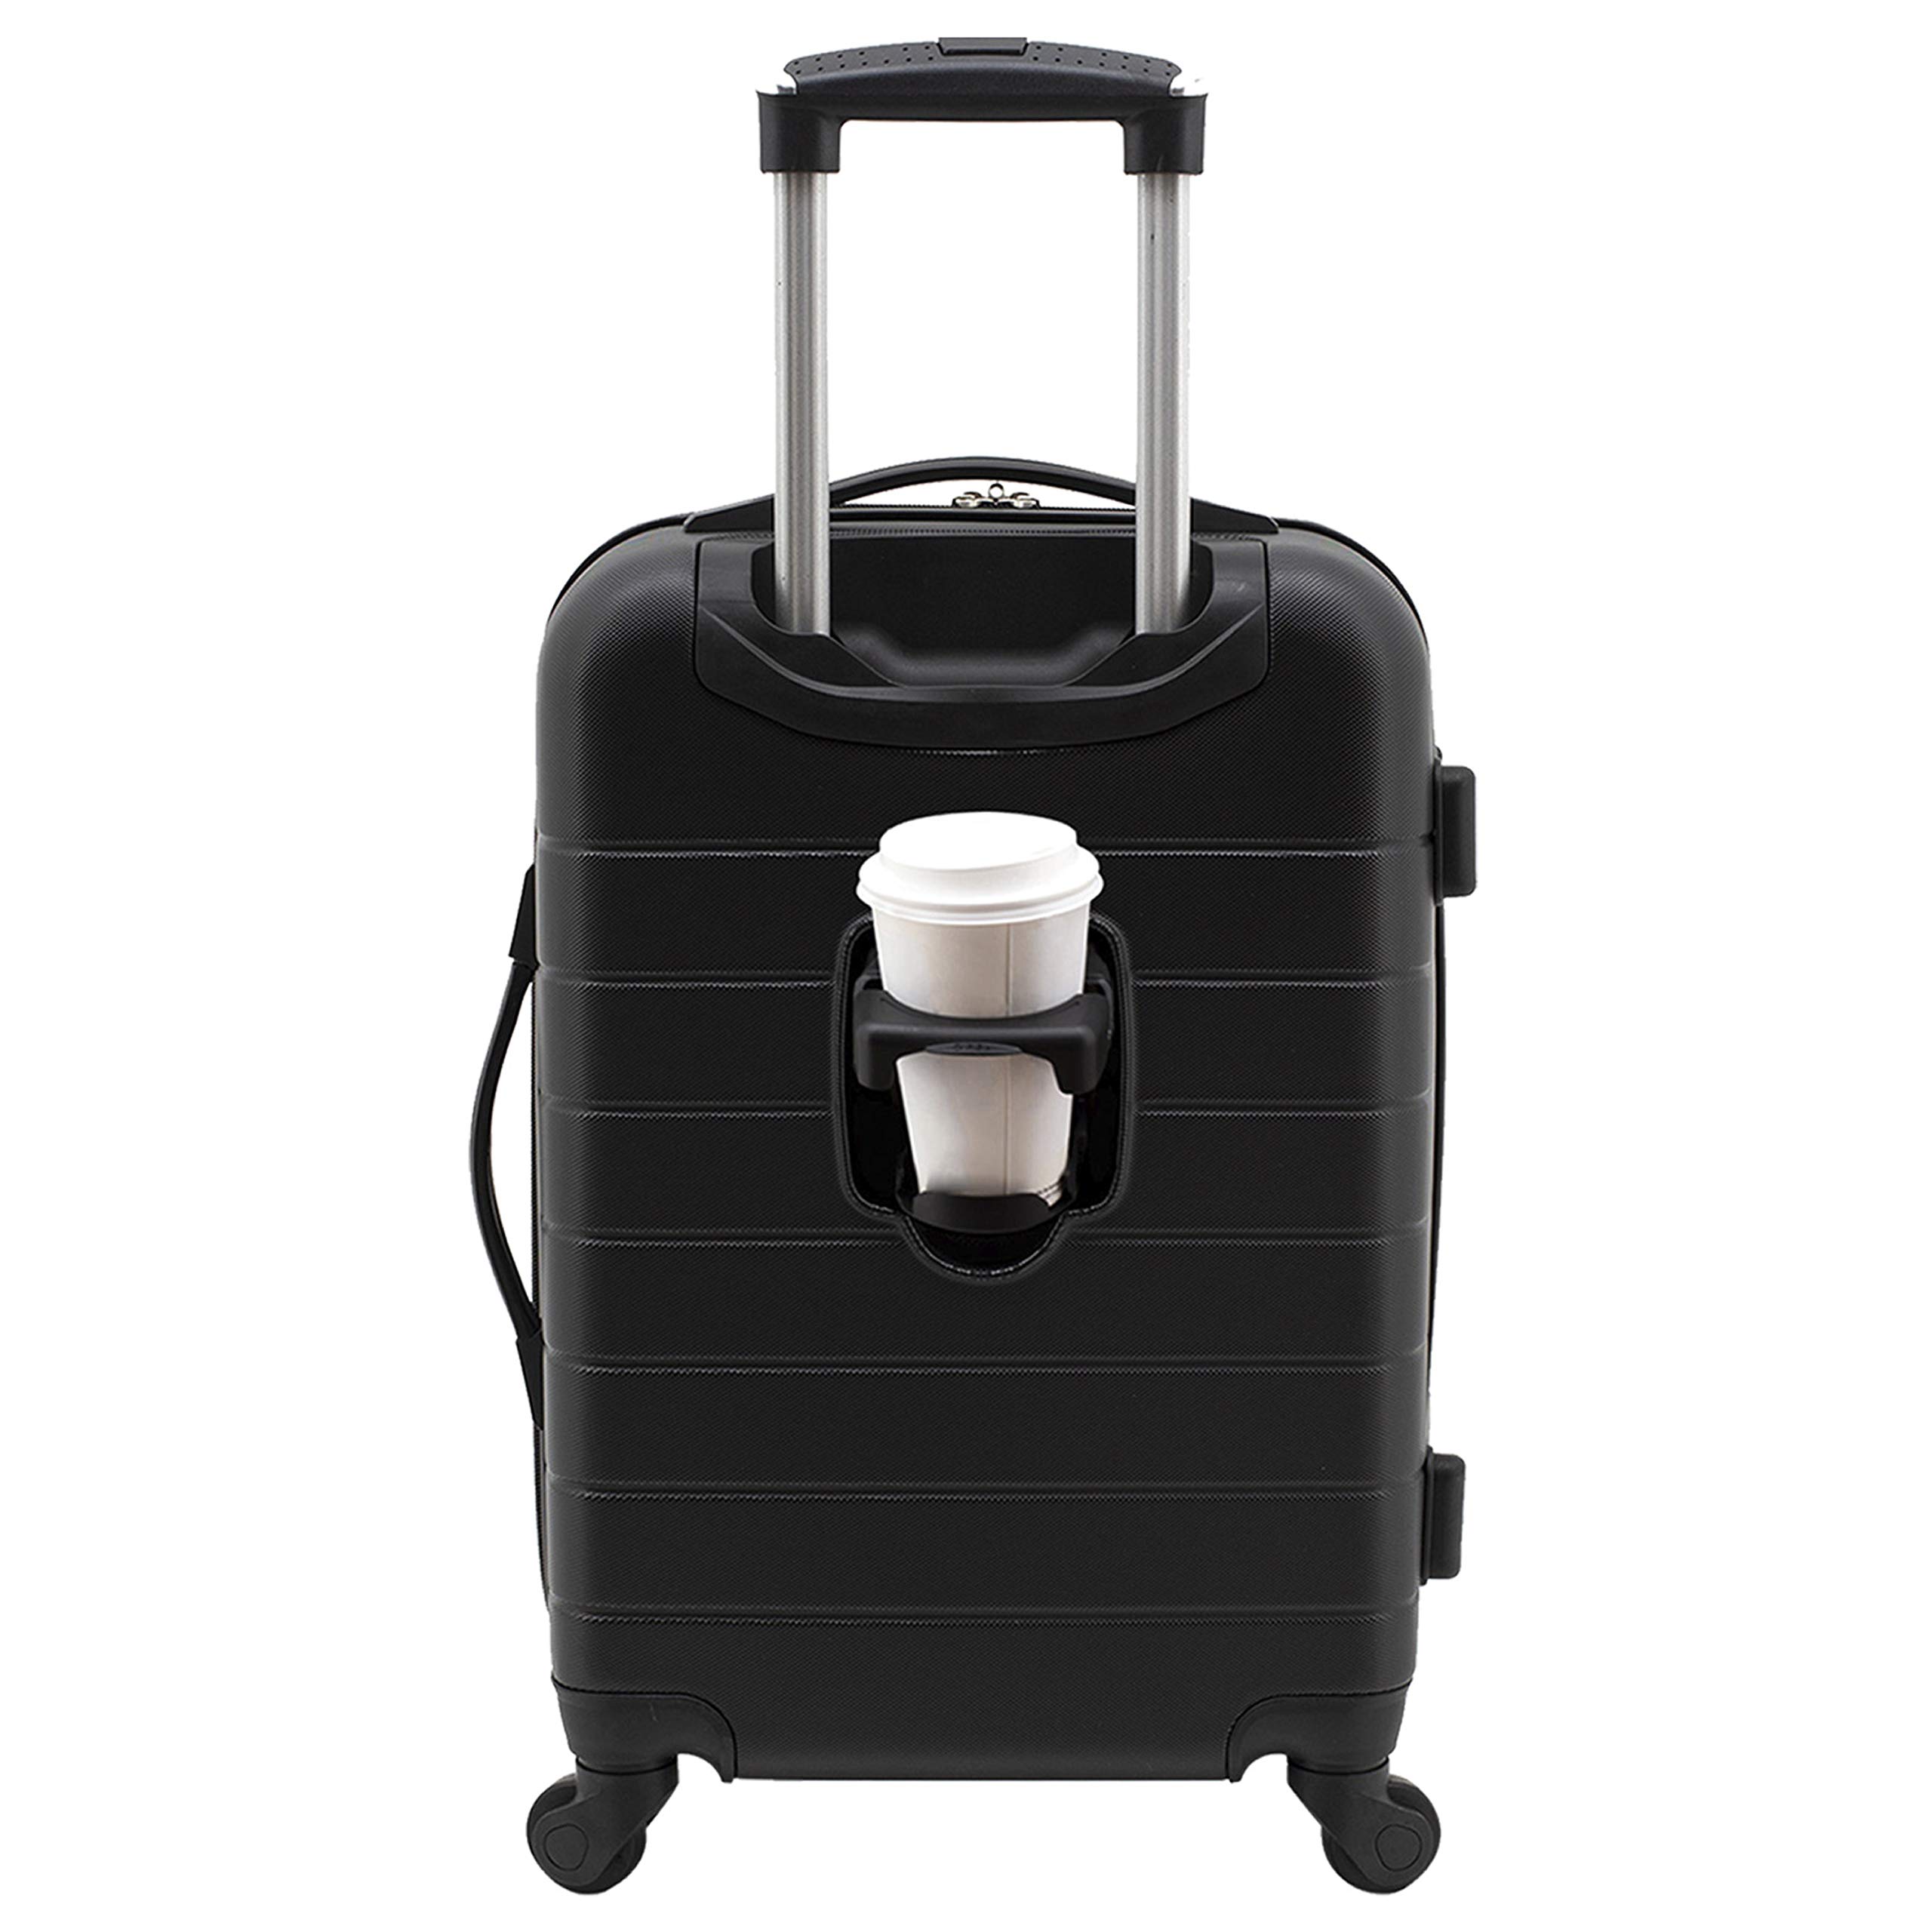 Wrangler 20" Smart Spinner Carry-On Luggage With Usb Charging Port ,Black $31.45